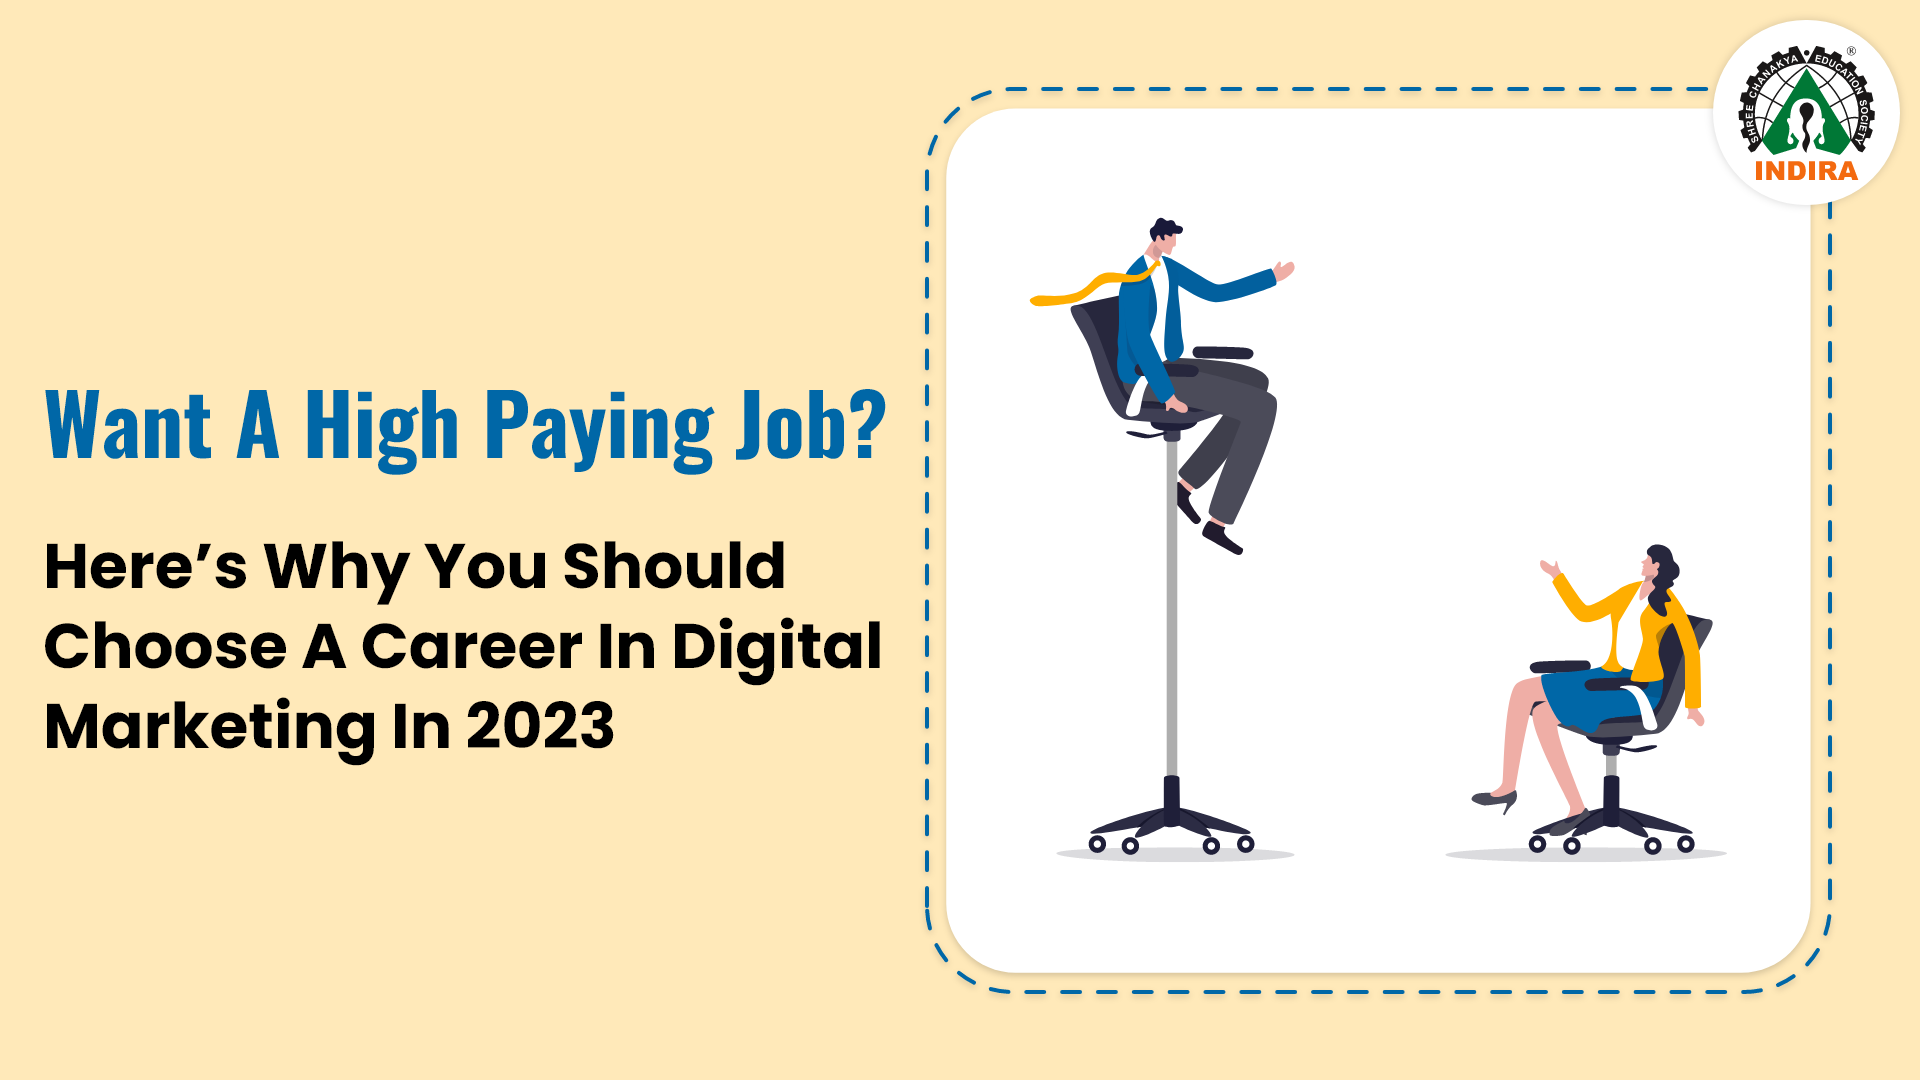 Want a High Paying Job? Here’s Why You Should Choose a Career in Digital Marketing in 2023 